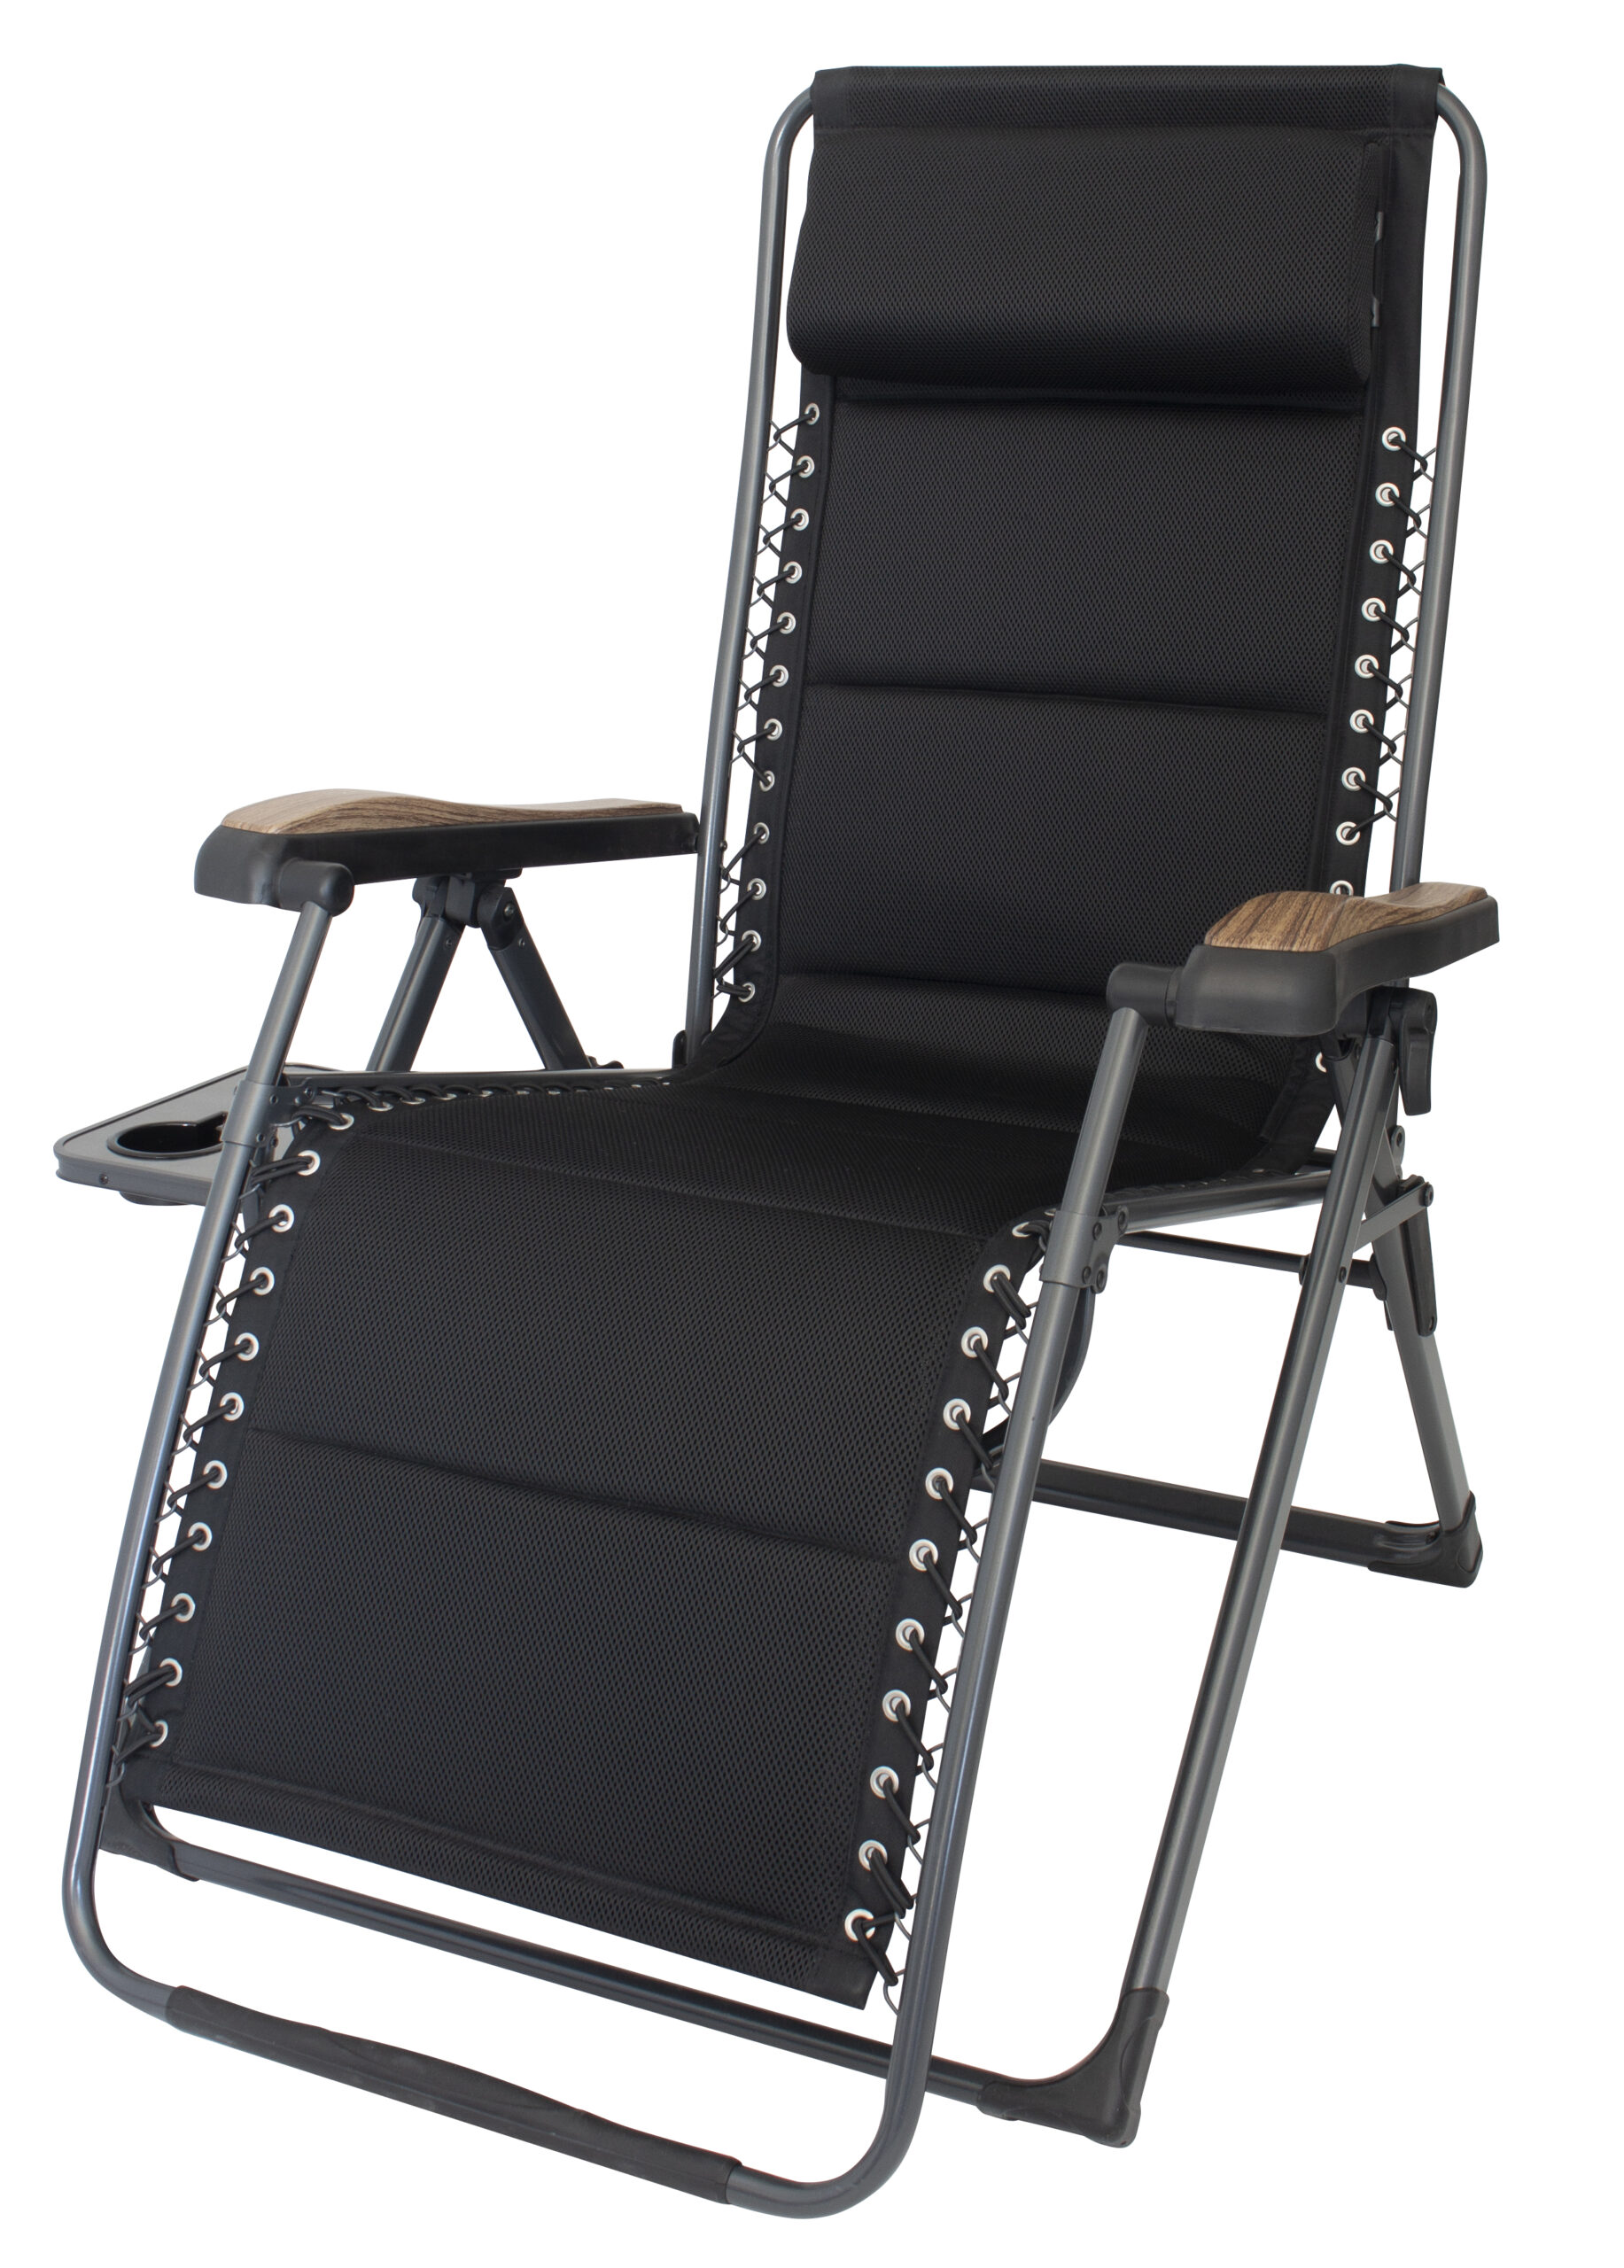 Majestic Relax chair 3D mesh - Eurotrail | The way camp!